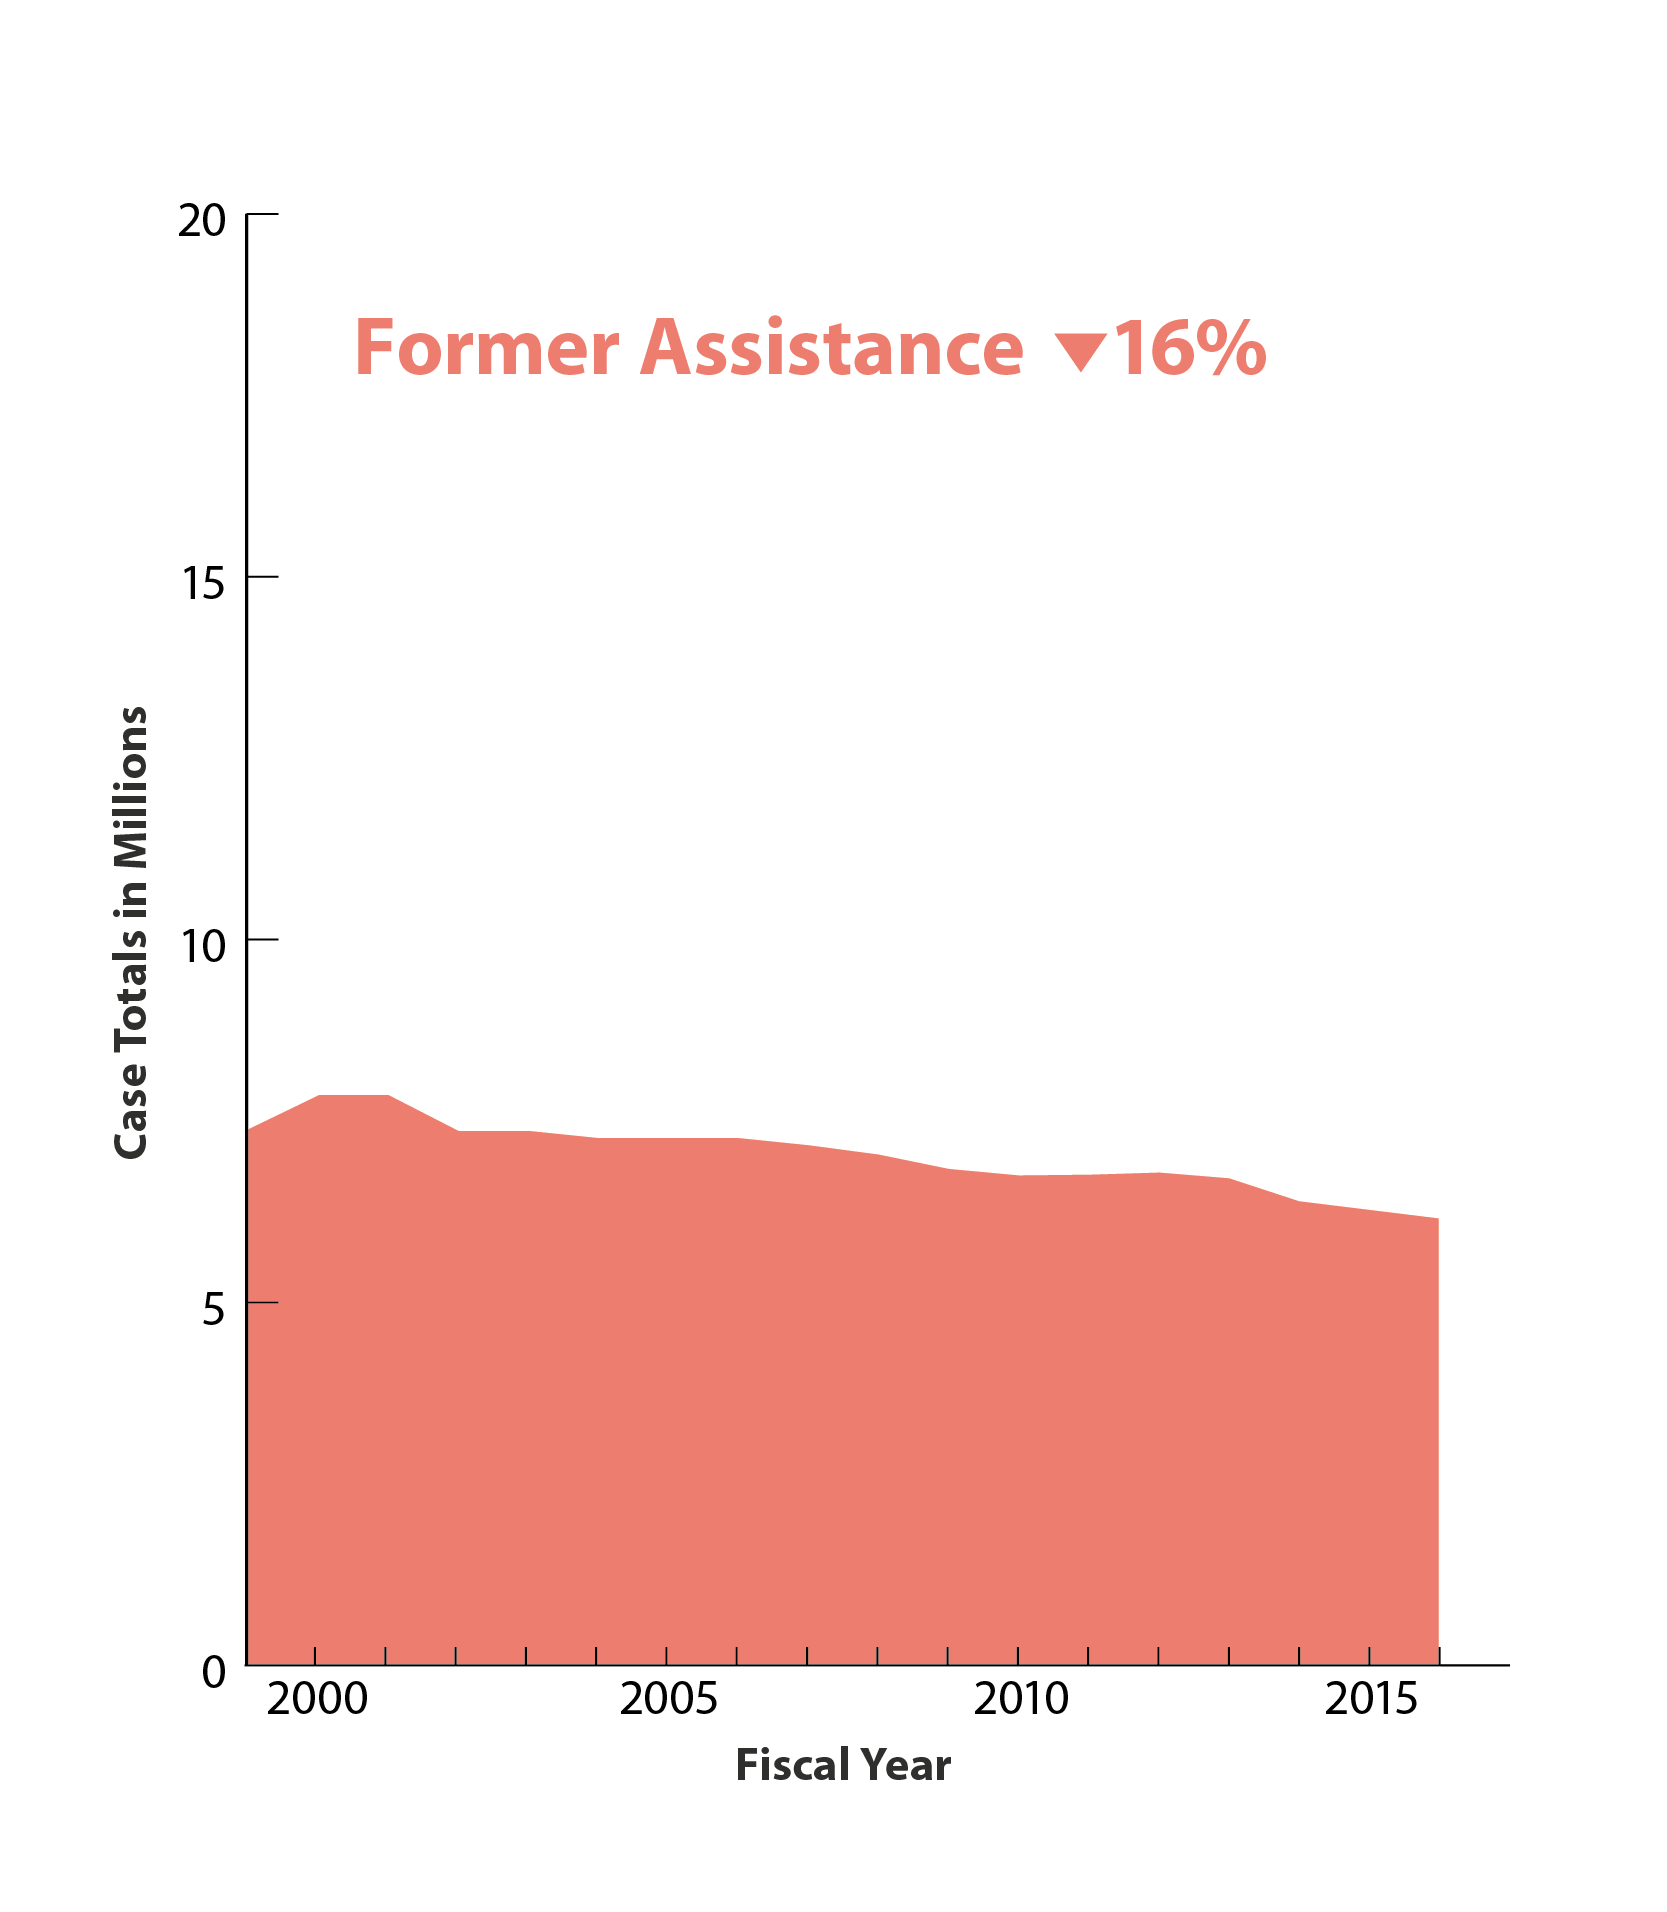 Former Assistance down 16%